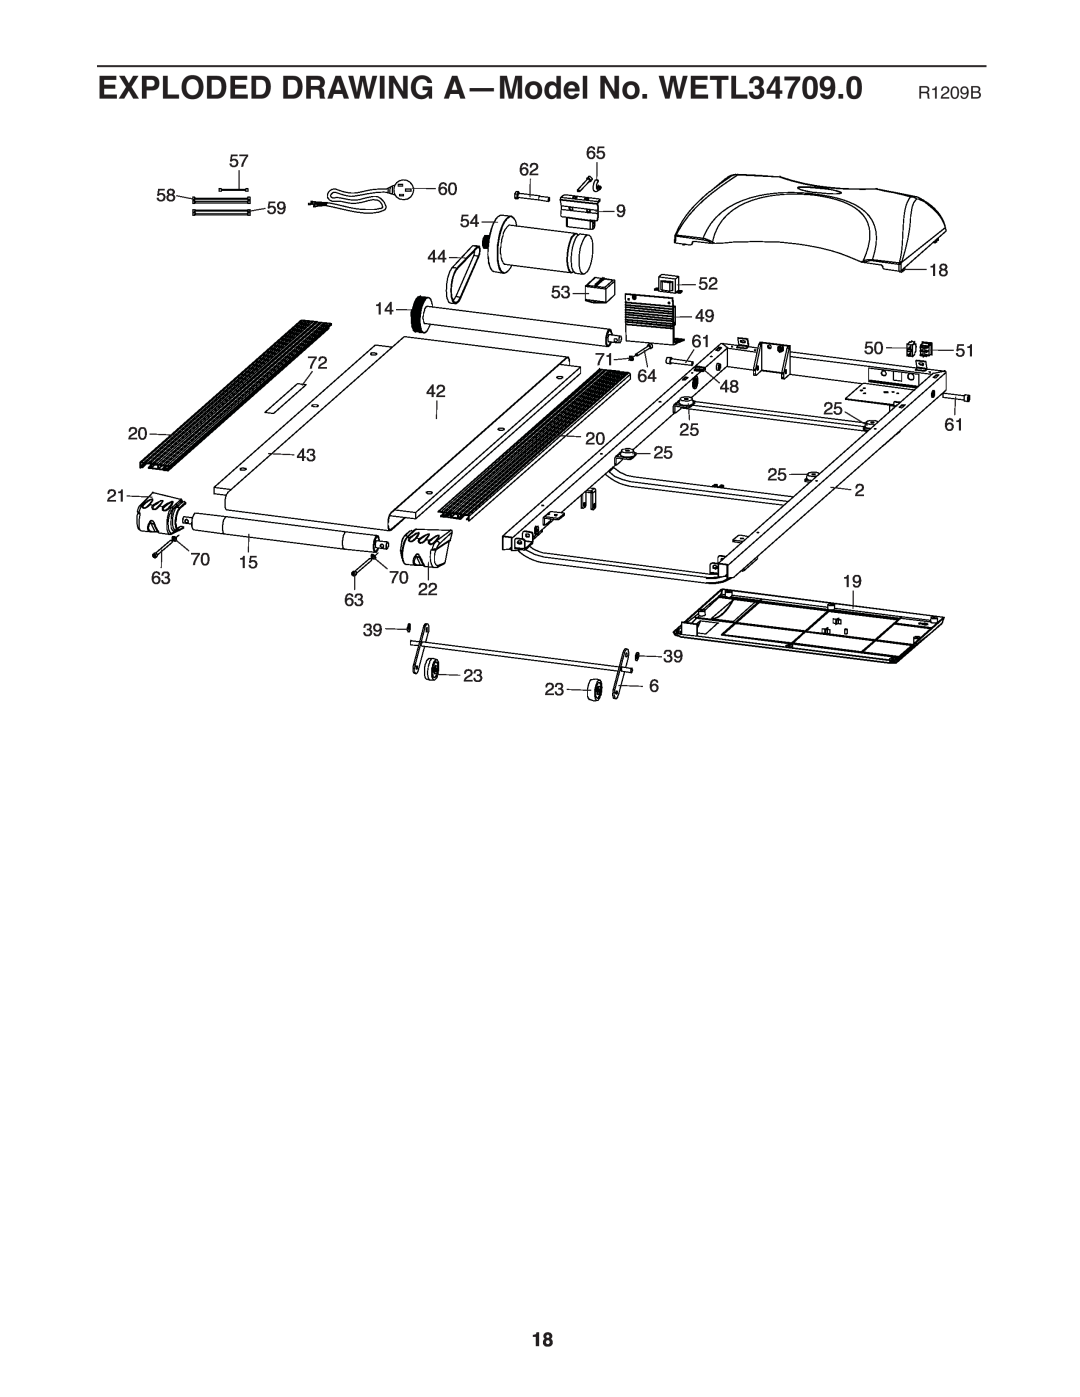 Weslo user manual EXPLODED DRAWING A-Model No. WETL34709.0 R1209B 